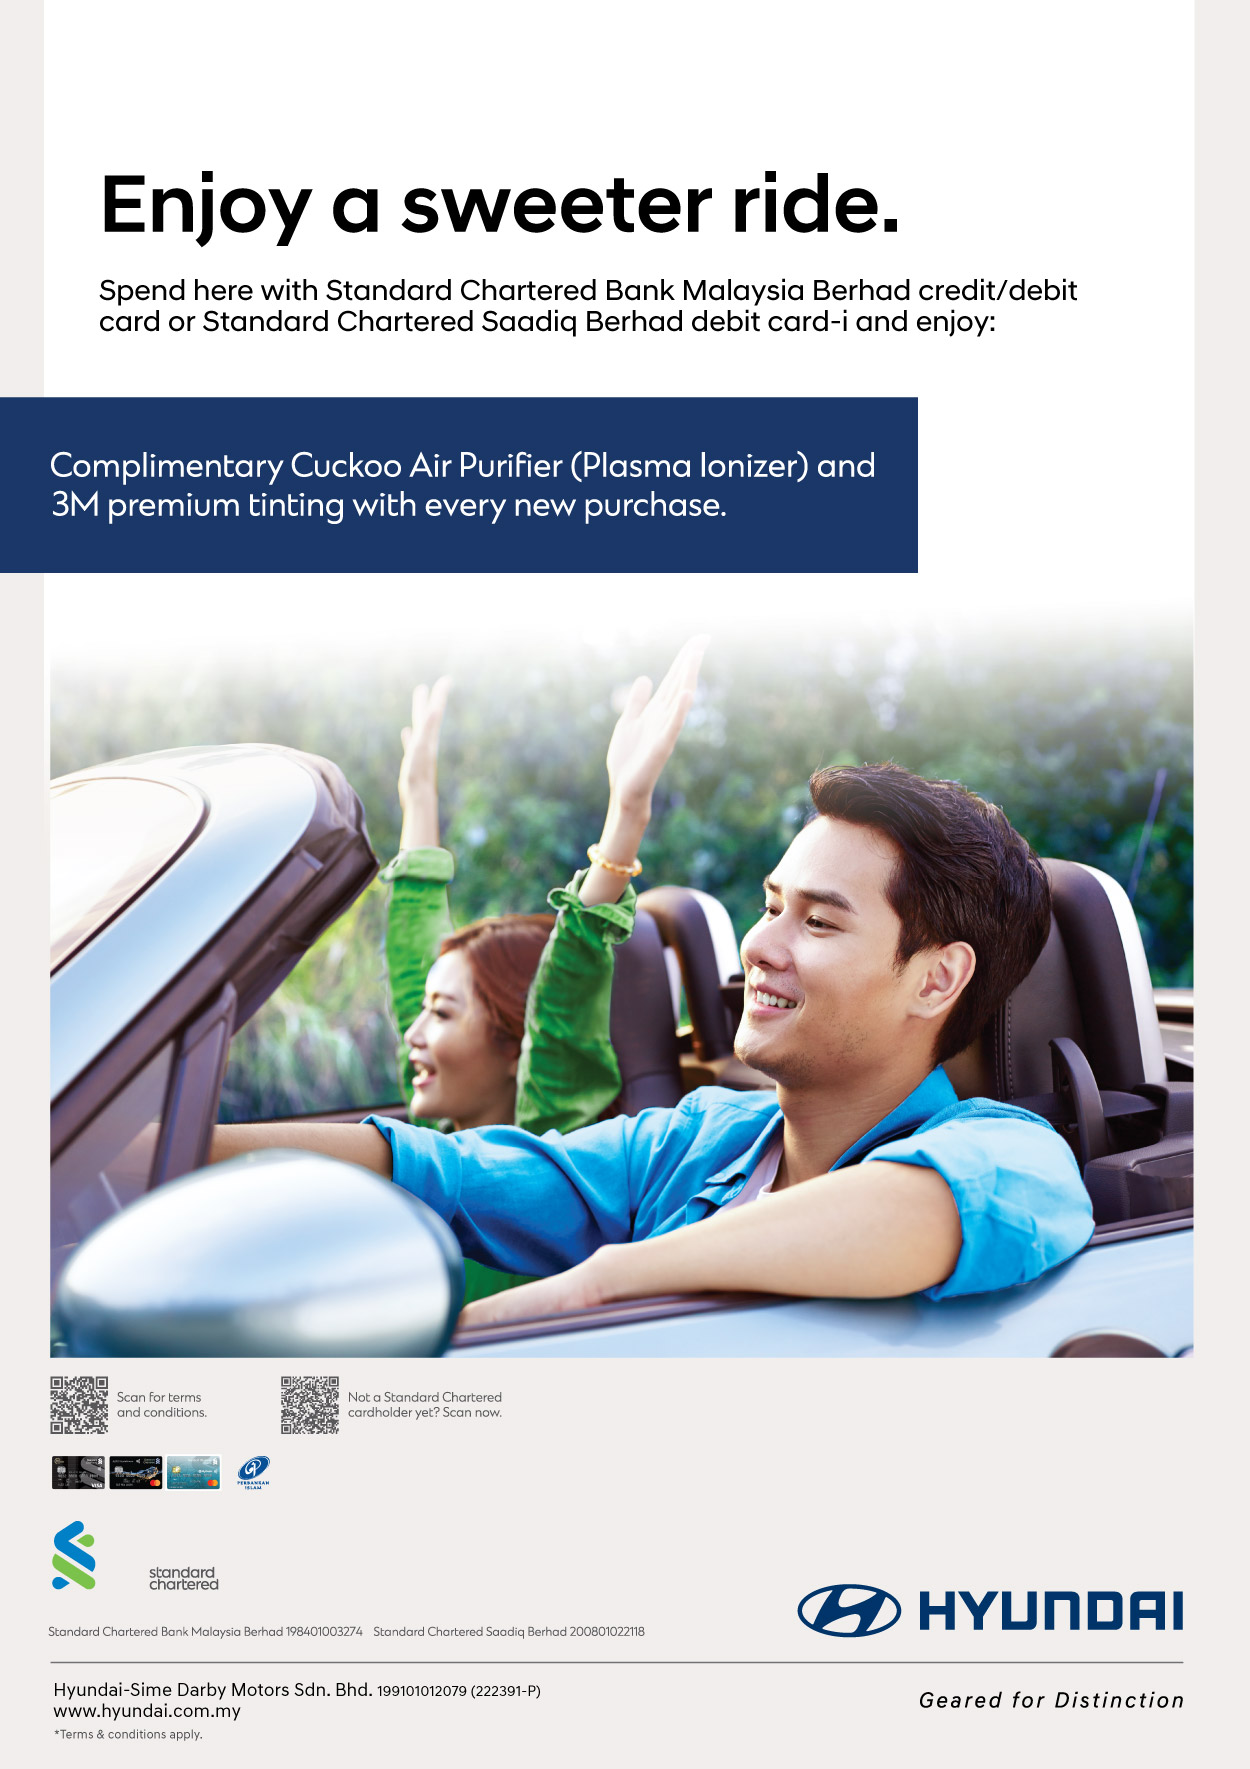 Enjoy a sweeter ride | Spend here with Standard Chartered Bank Malaysia Berhad credit/debit card or Standard Chartered Saadiq Berhad debit card-i and enjoy. Terms & conditiona apply.